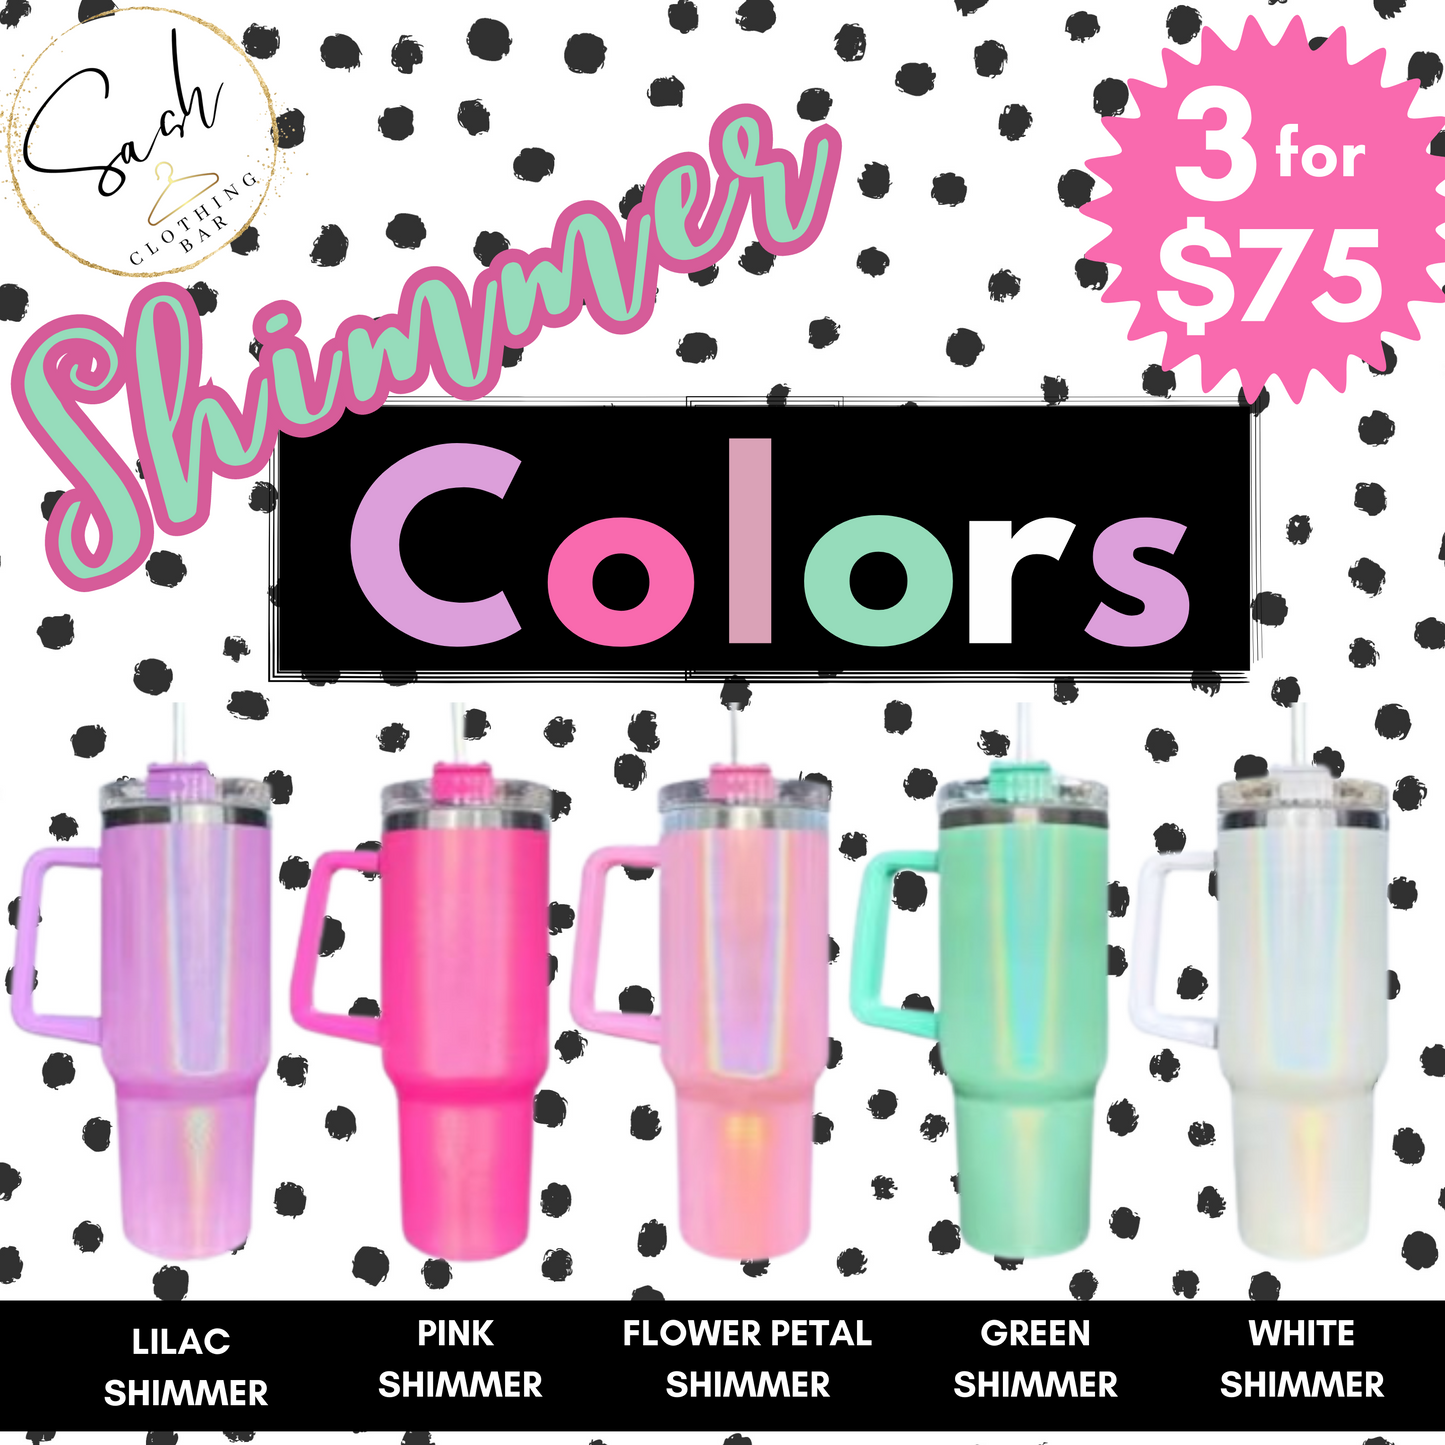 40 oz Shimmer Tumbler with Handle in Light Pink